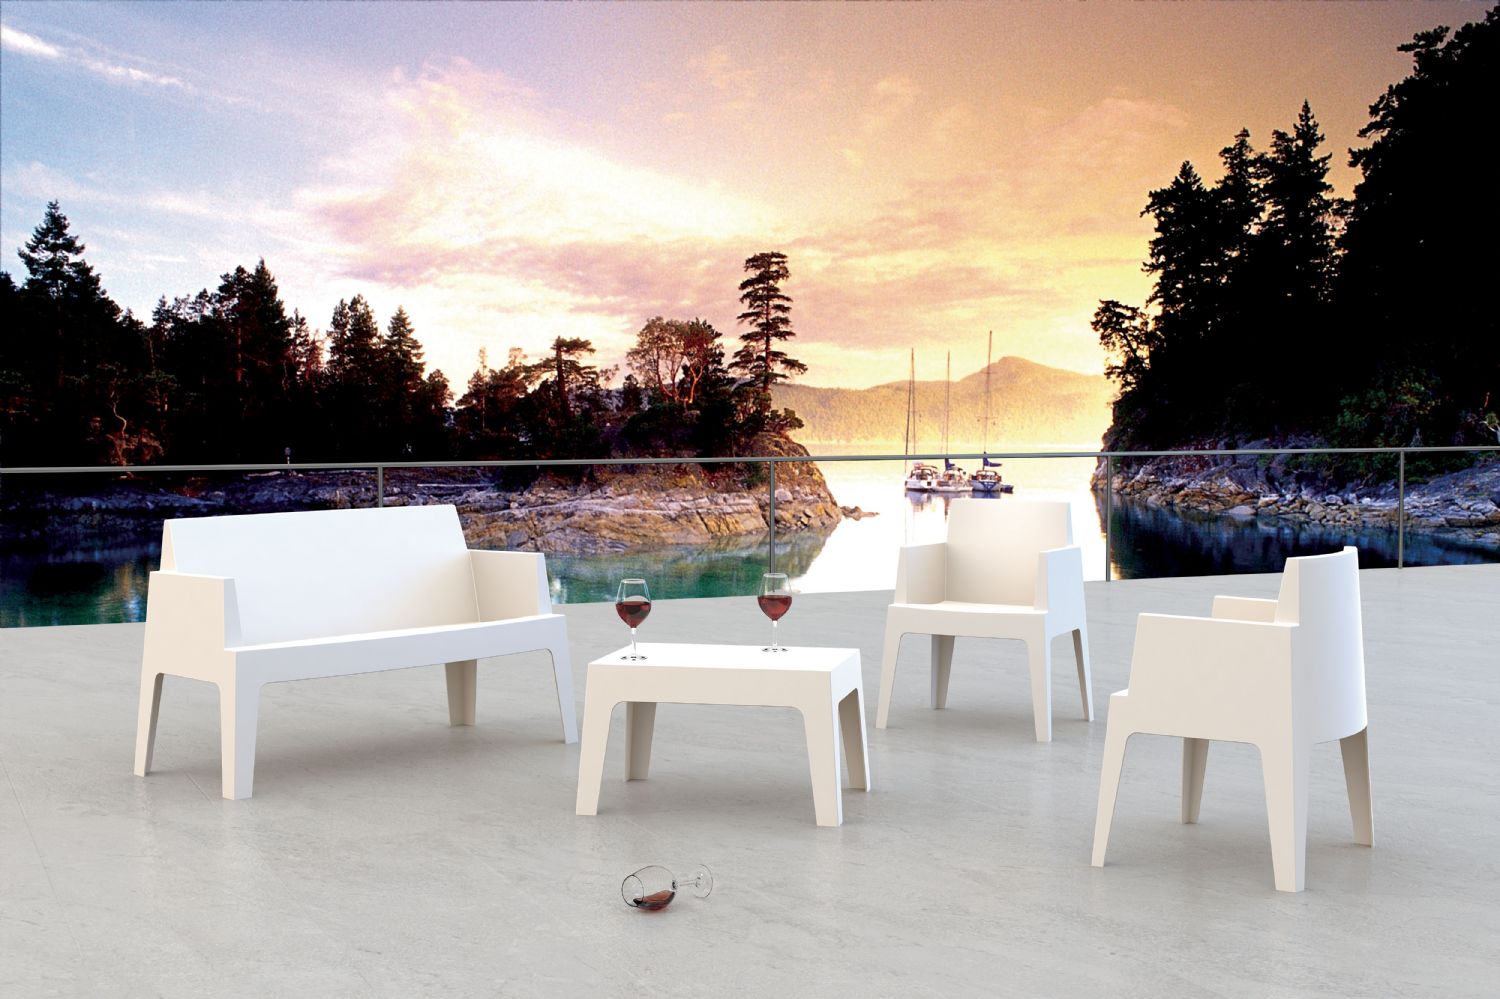 Box Resin Outdoor Coffee Table White ISP064-WHI - 5